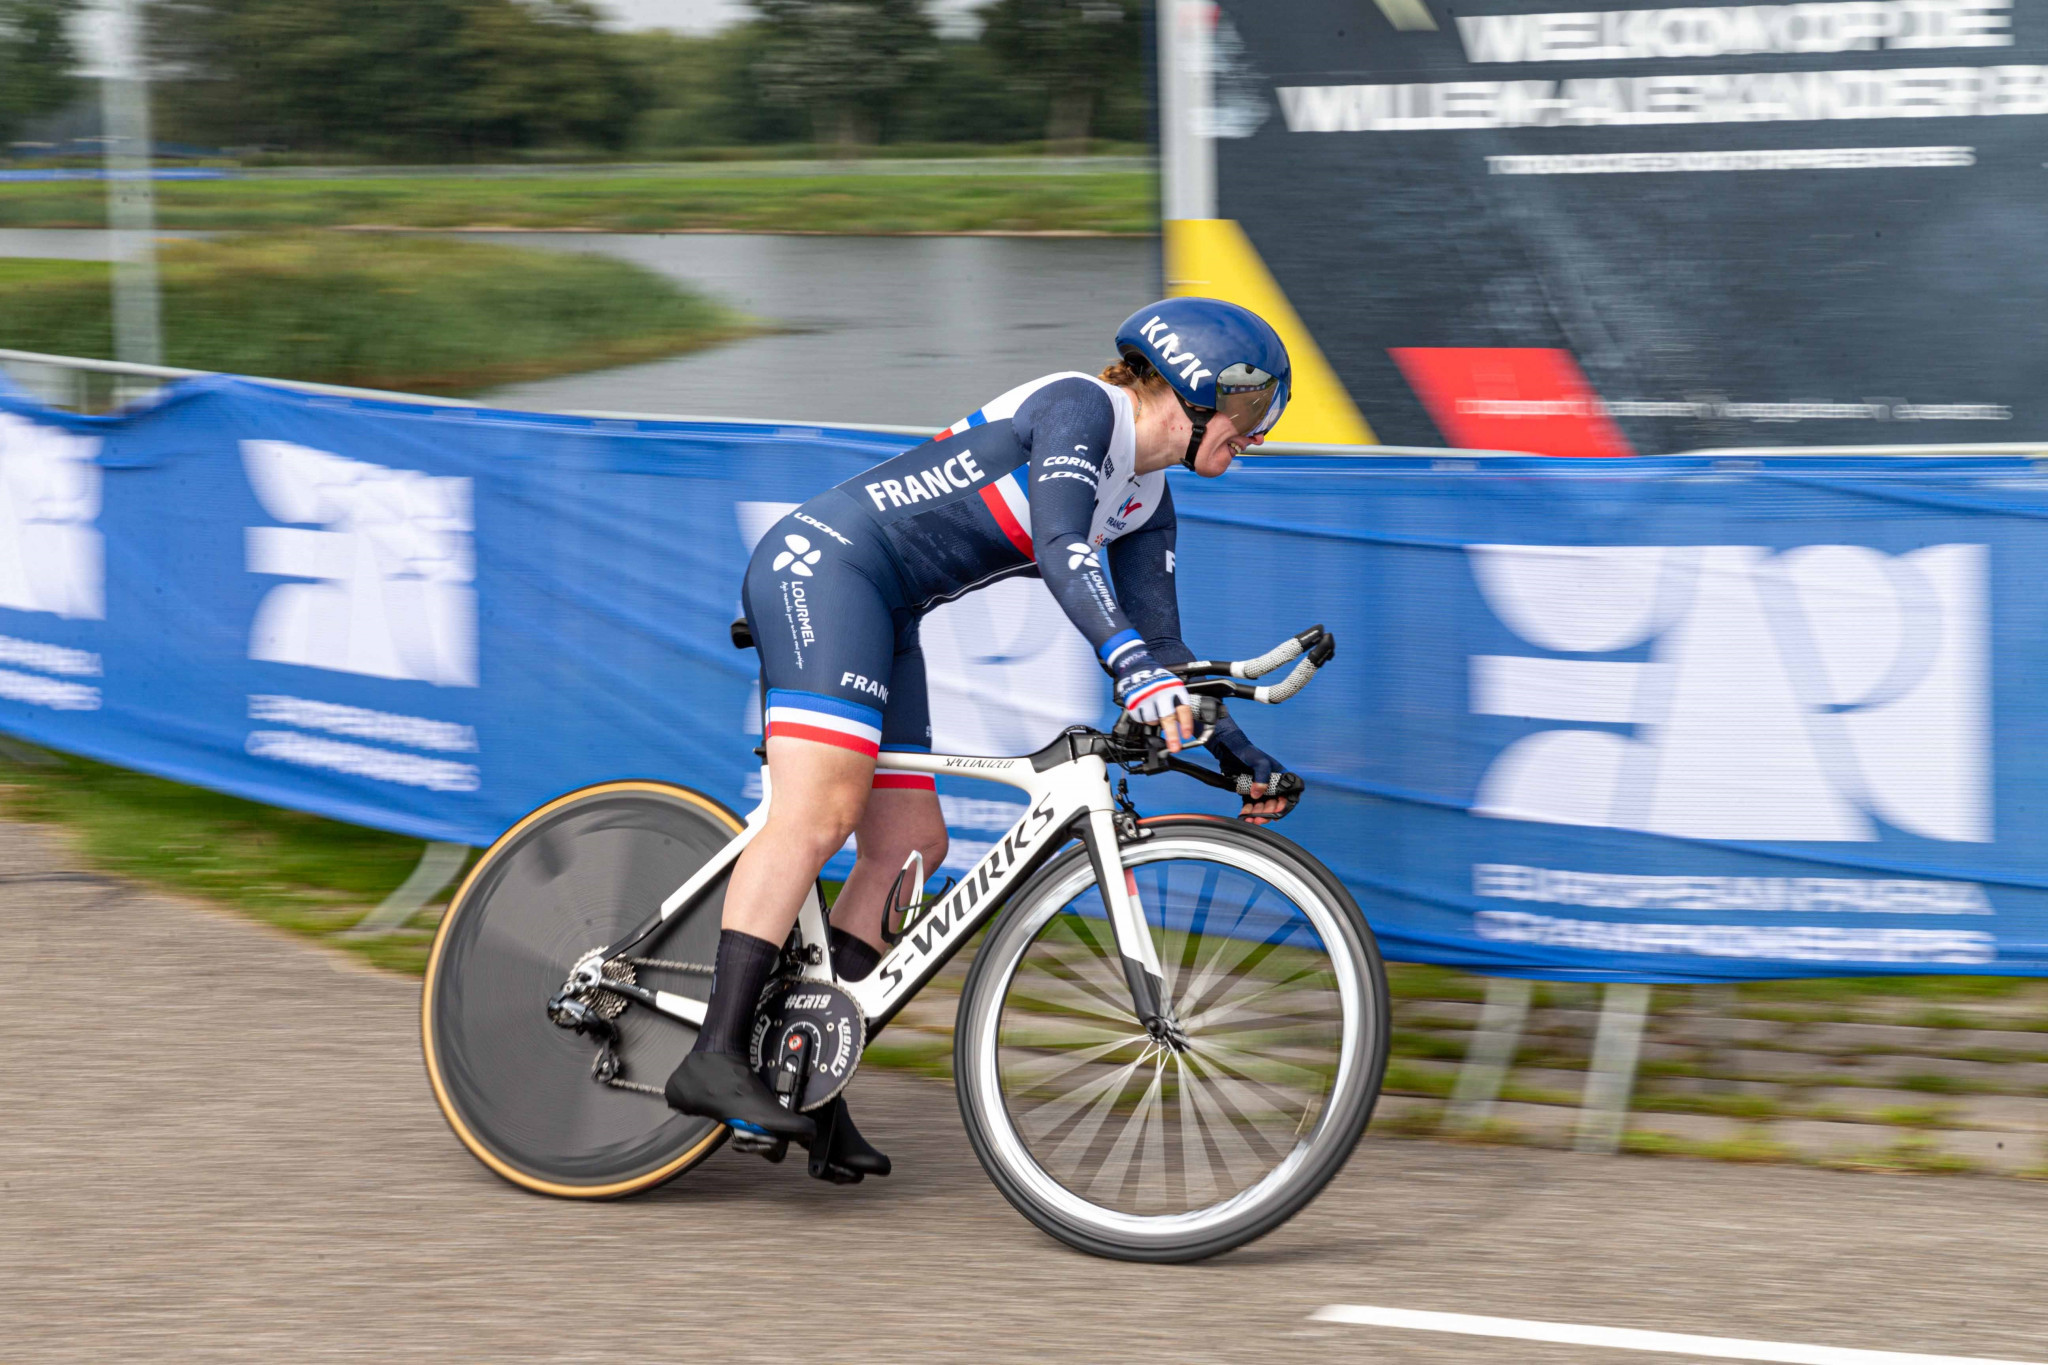 France claimed four gold medals in a successful morning of Para cycling competition ©EPC